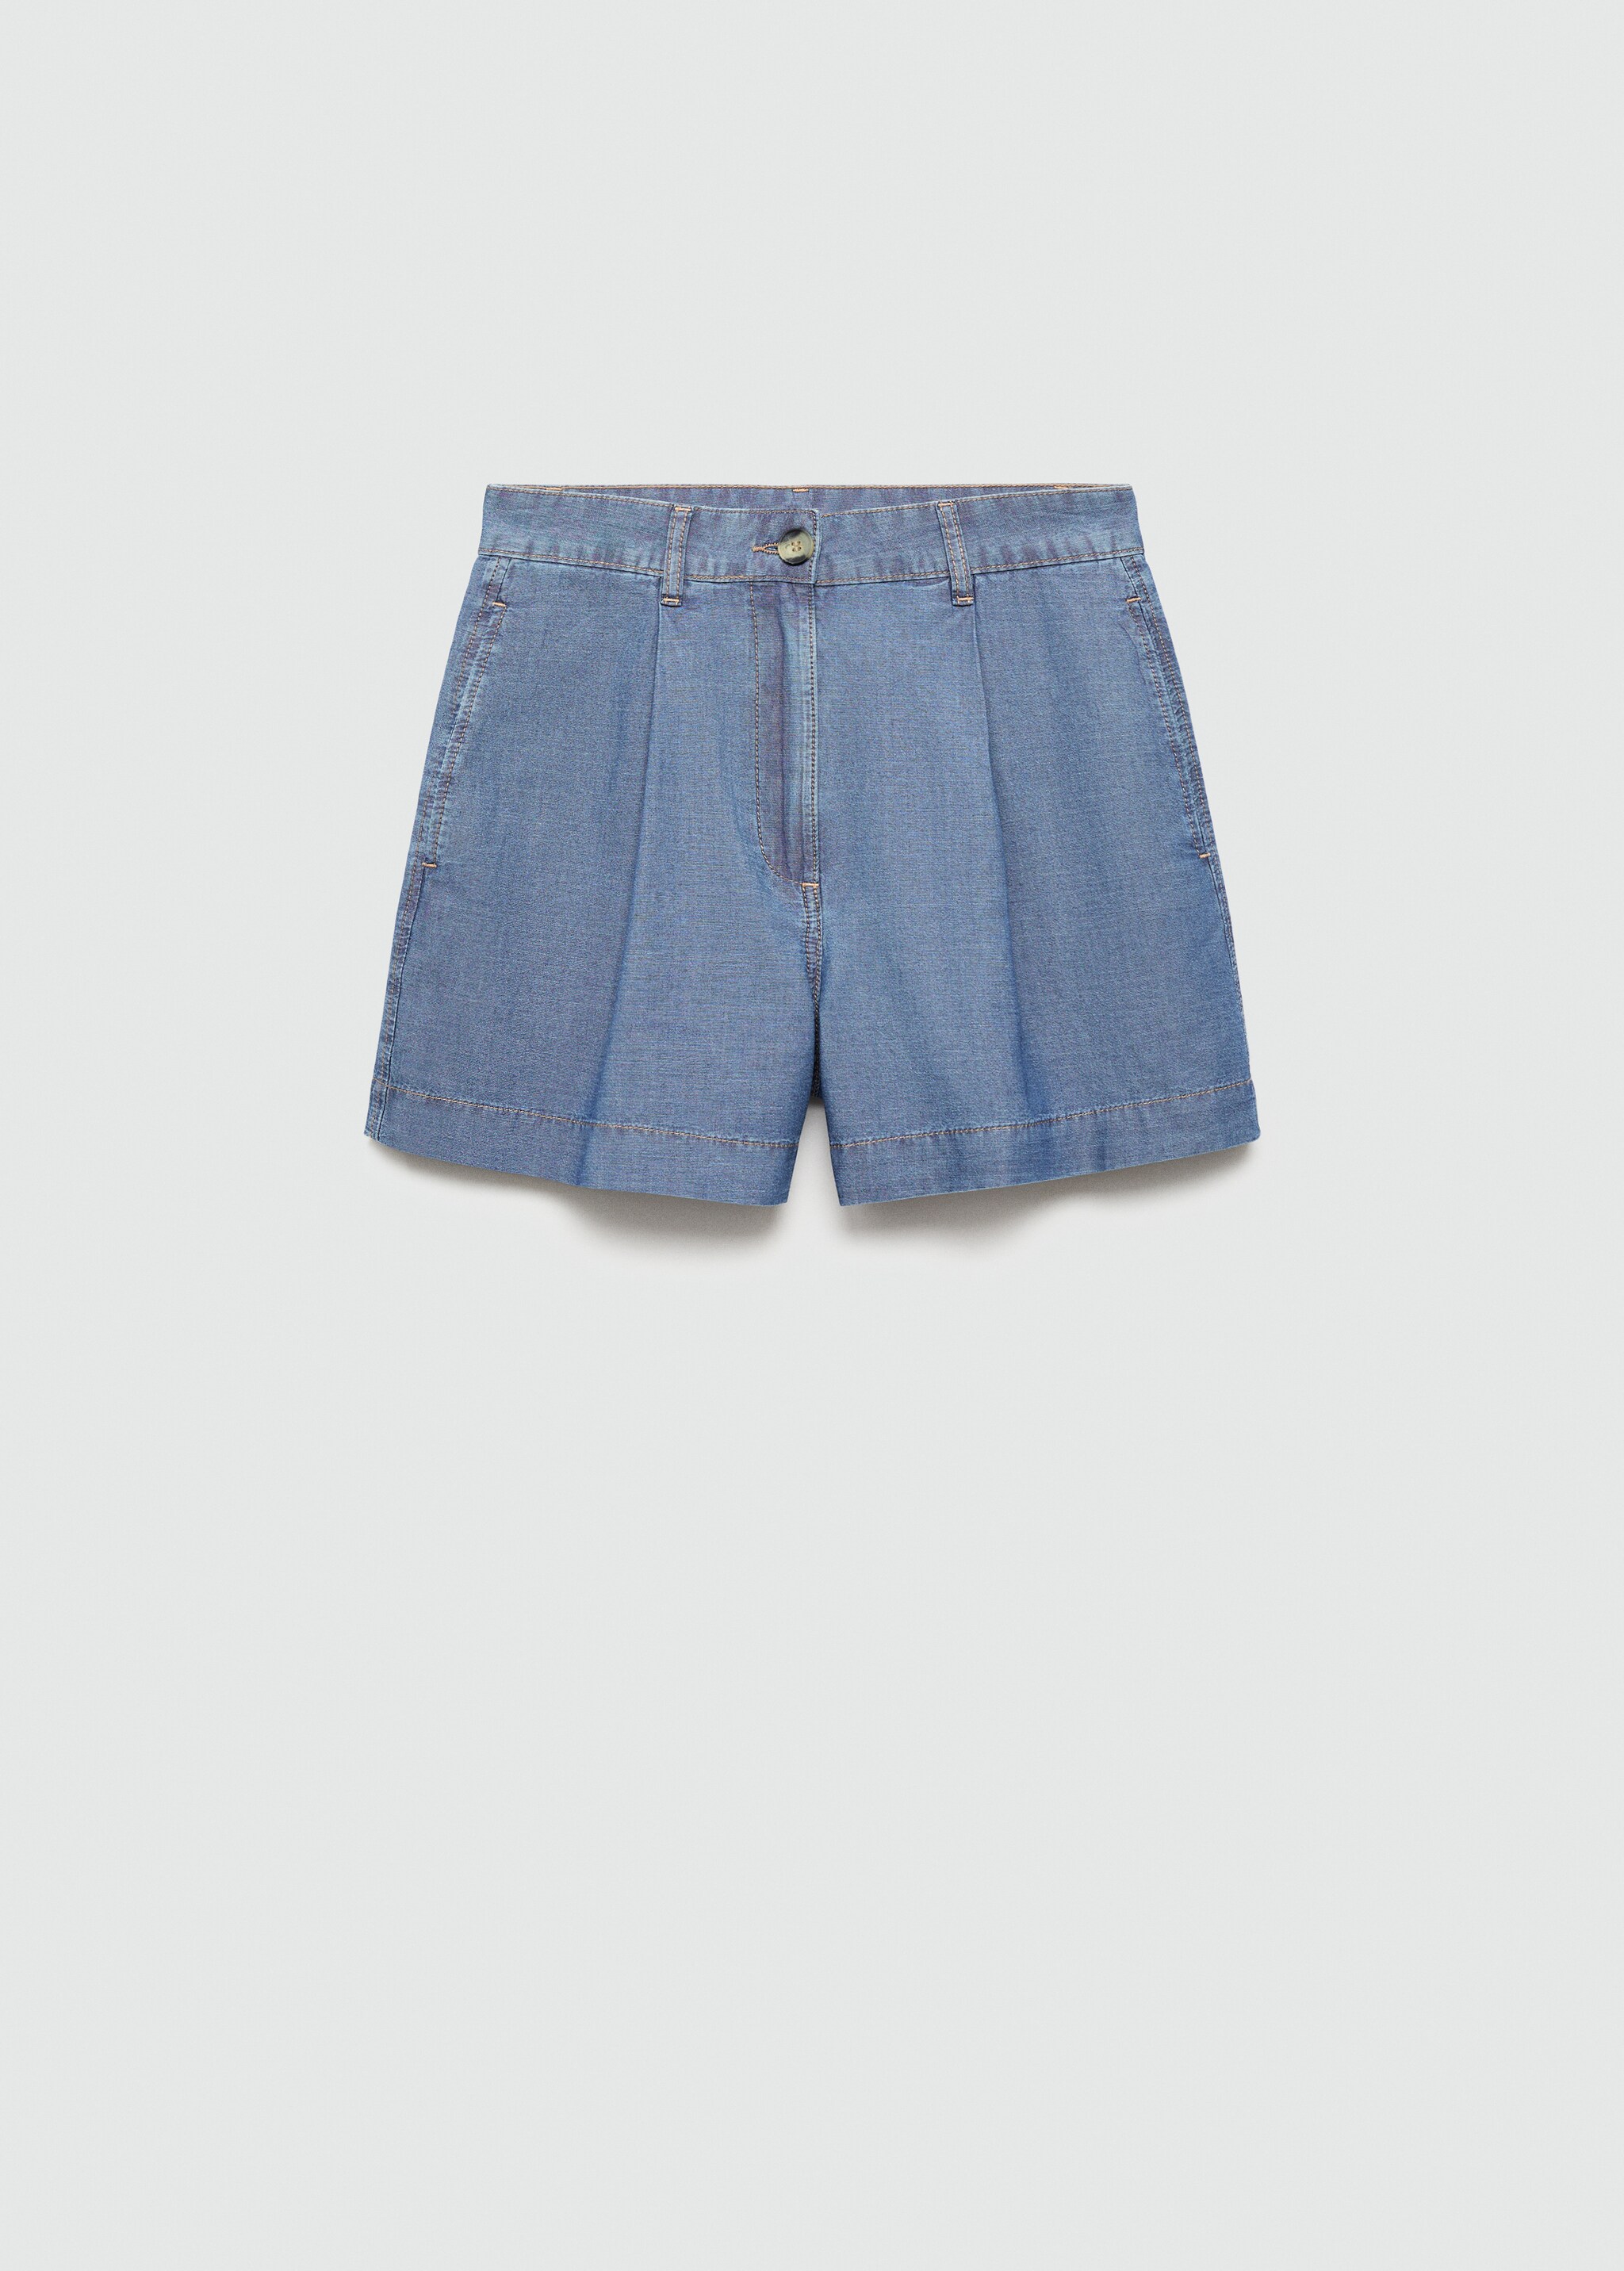 Denim shorts with pleats - Article without model